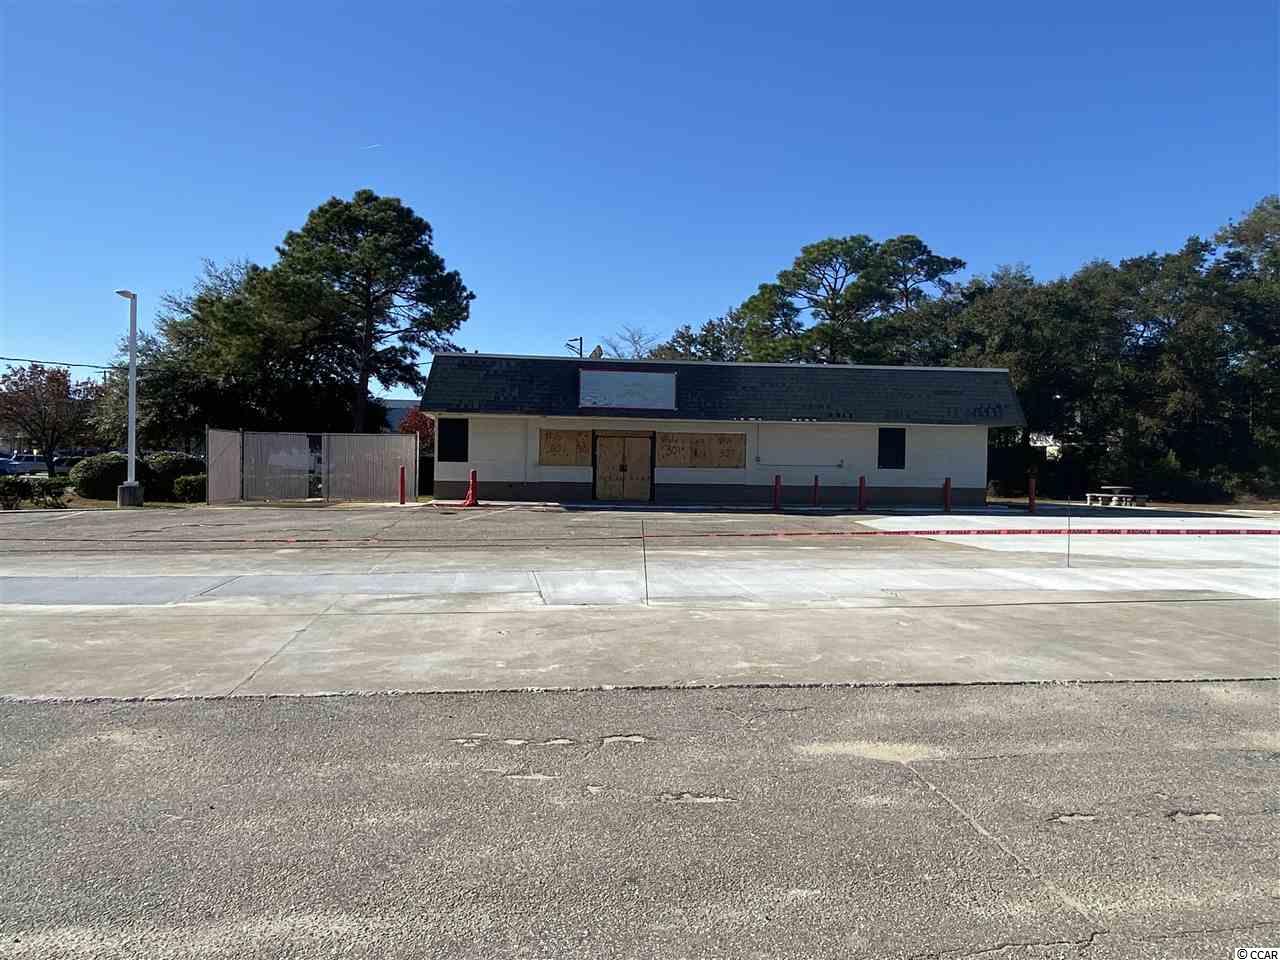 prime location: 1.03 acres on a hard corner at traffic light. previously circle k convenient store. building is over 2500 sq ft that sits on a large comer lot at the light at hwy 17 and hwy 707. open floor plan on interior of building. underground gas tanks have been removed. parcel available for sale as well as lease.  national tenants surround this property including food lion, cvs, auto zone, bb&t, waffle house, and many more. scrubby's car wash is directly across the street. four lane access to hwy 17, 707 , 31. one of the highly densely populated area in georgetown and horry counties.